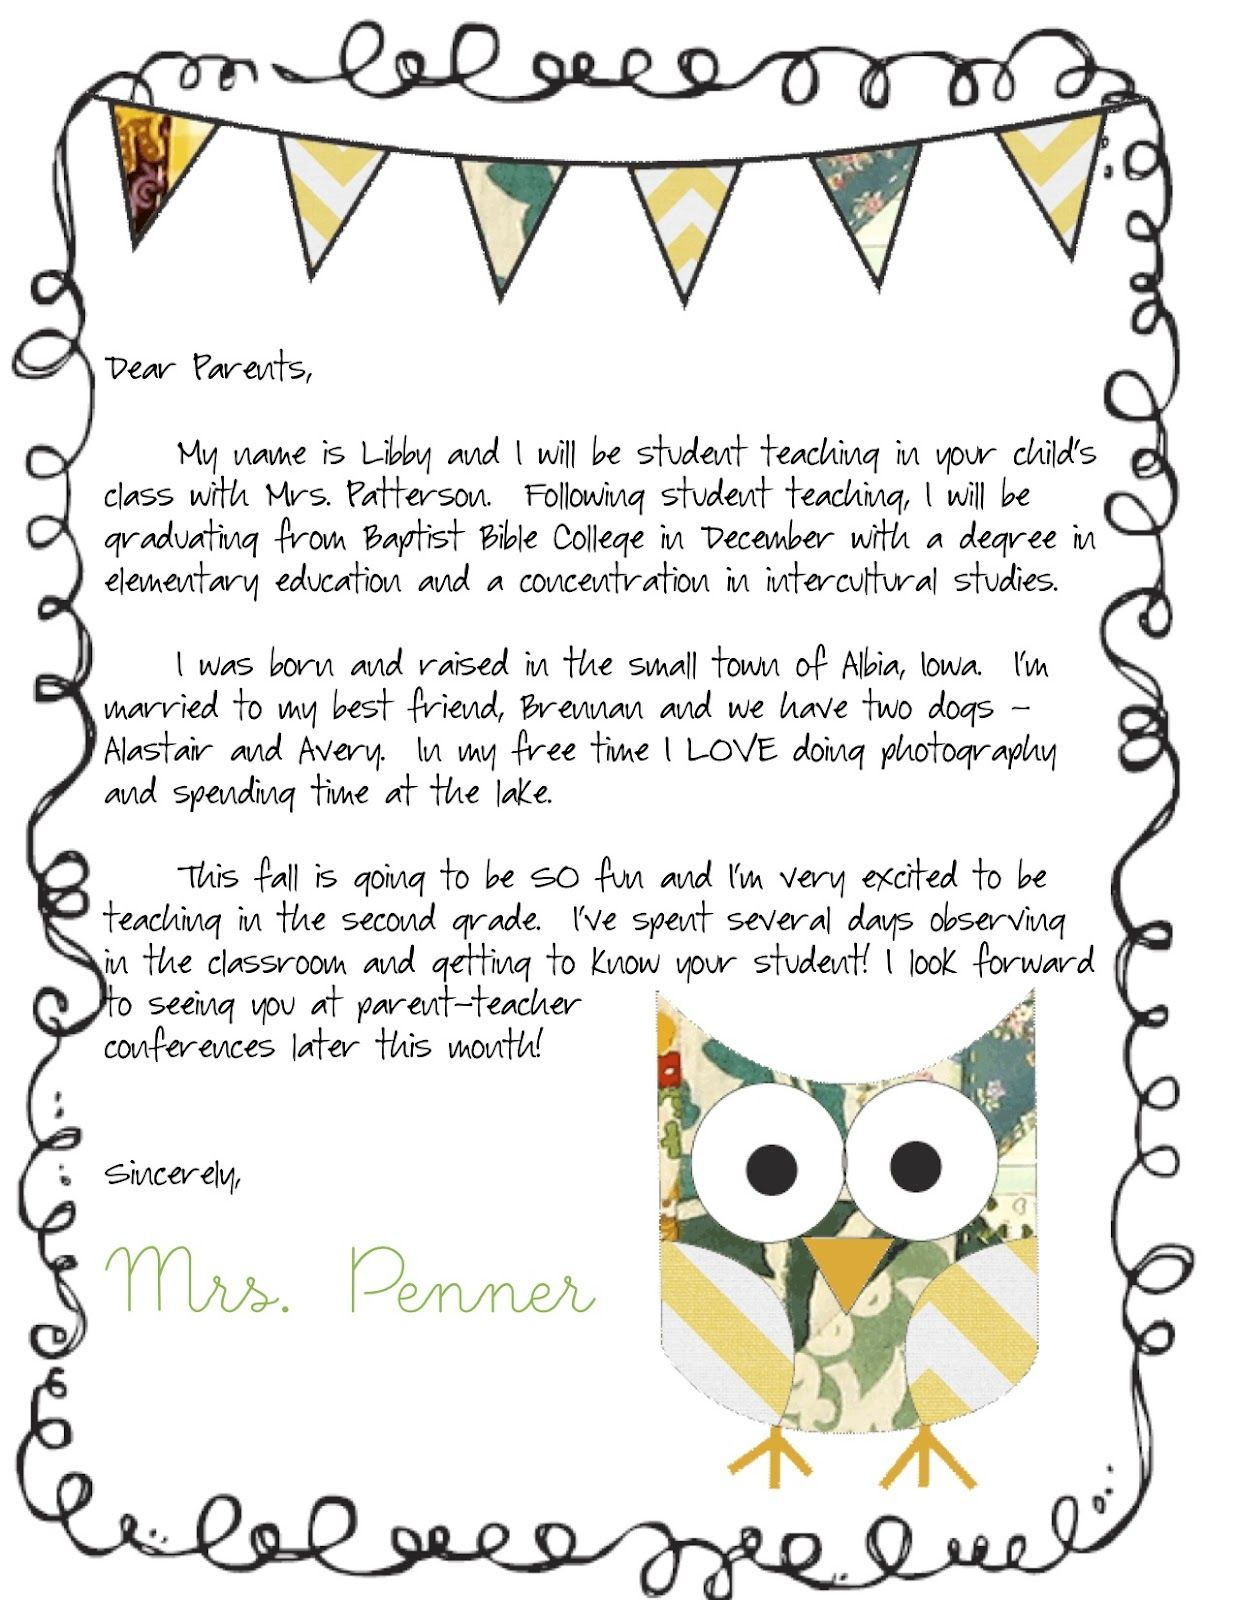 teacher-welcome-letter-to-parents-template-samples-letter-template